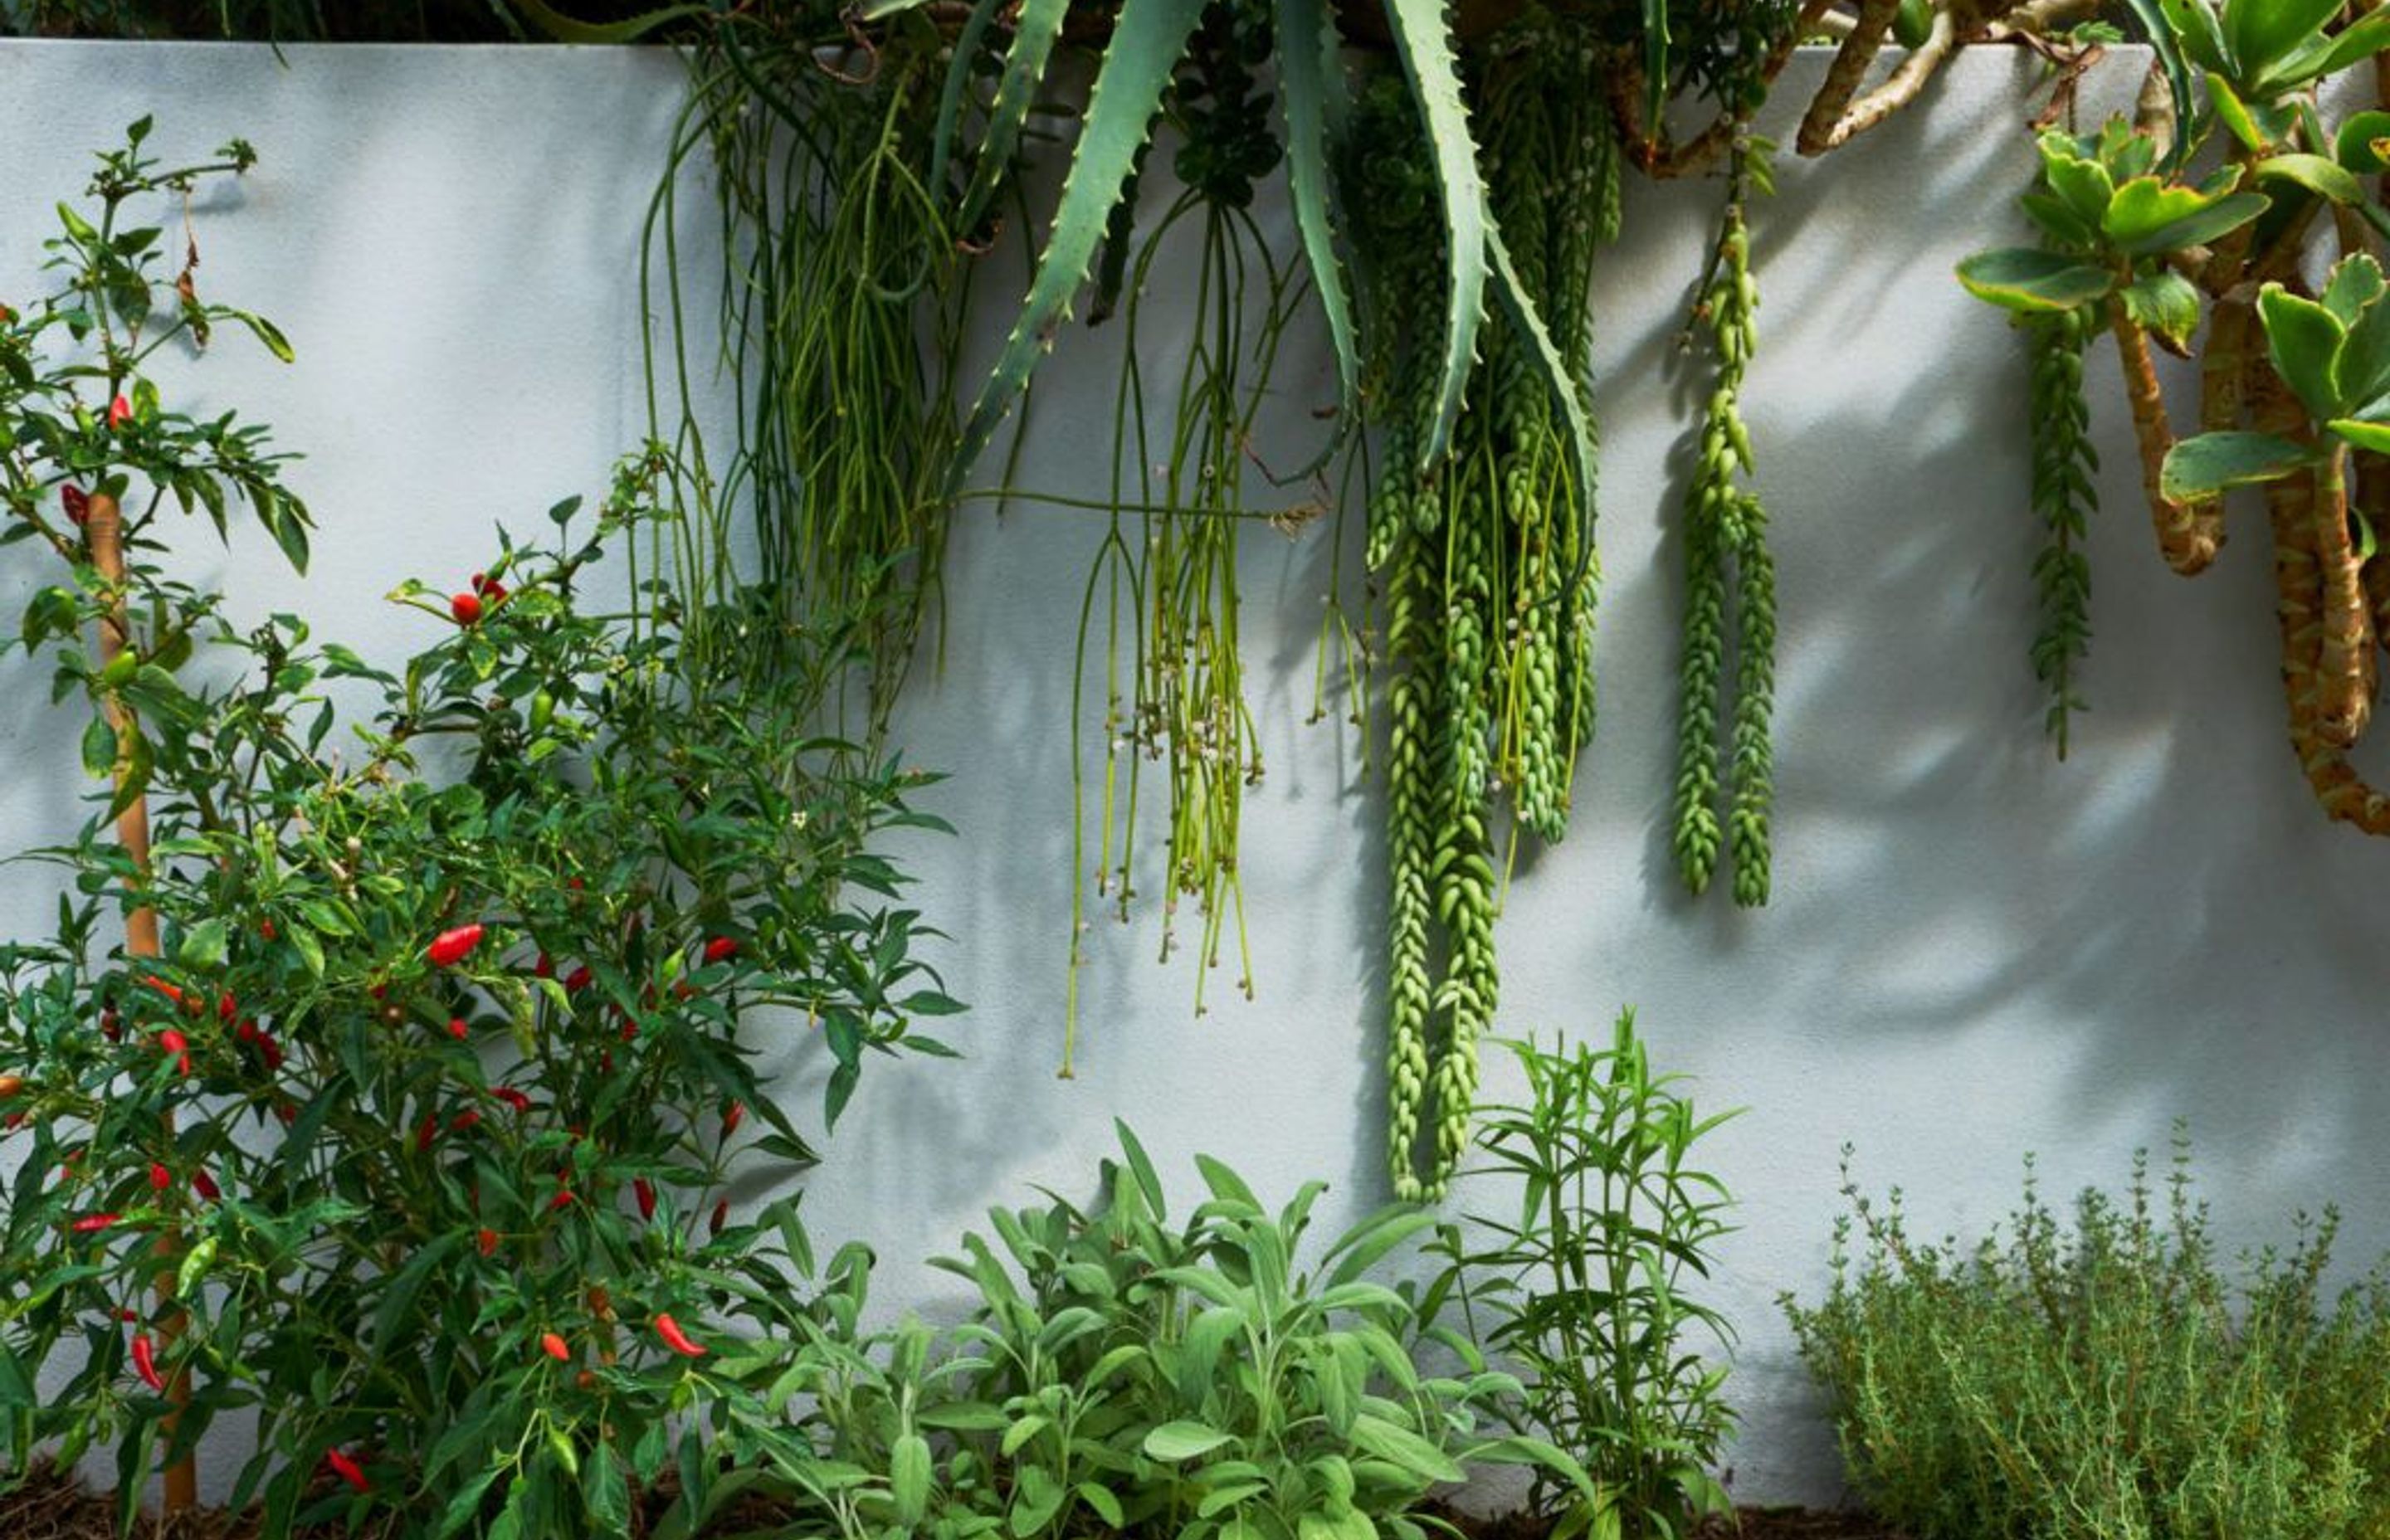 Siling labuyo (Chillies), Salvia officinalis (Sage), Artemisia dracunculus (Tarragon) and Thymus vulgaris (Thyme) married beautifully with a wall of succulents –  the Maroubra garden – Pepo Botanic Design.